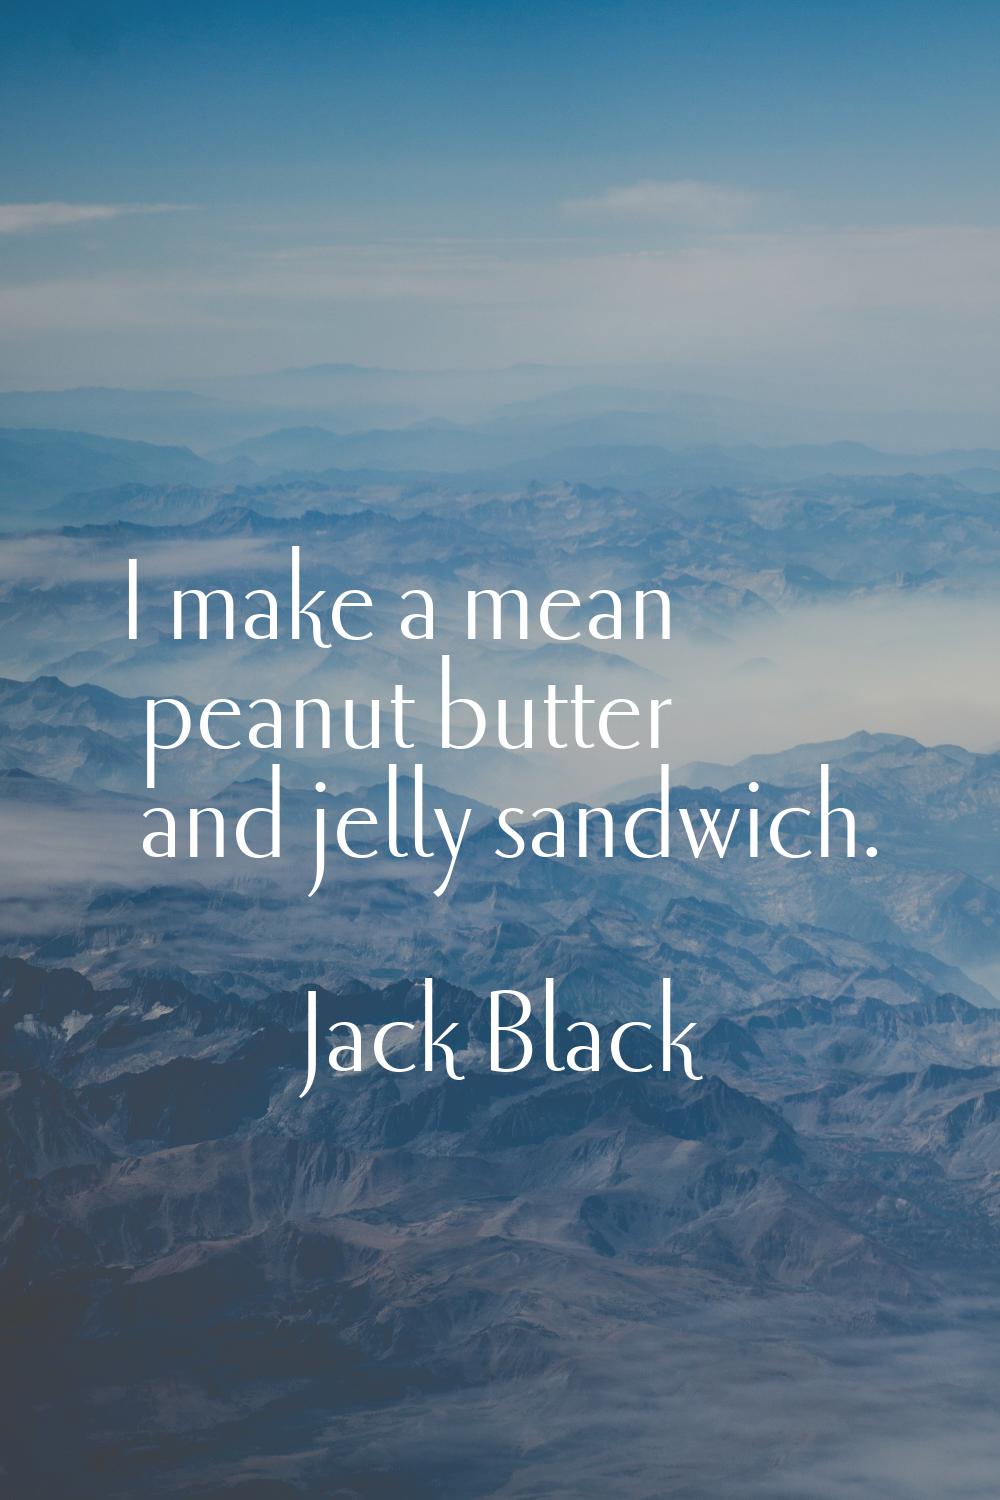 I make a mean peanut butter and jelly sandwich.